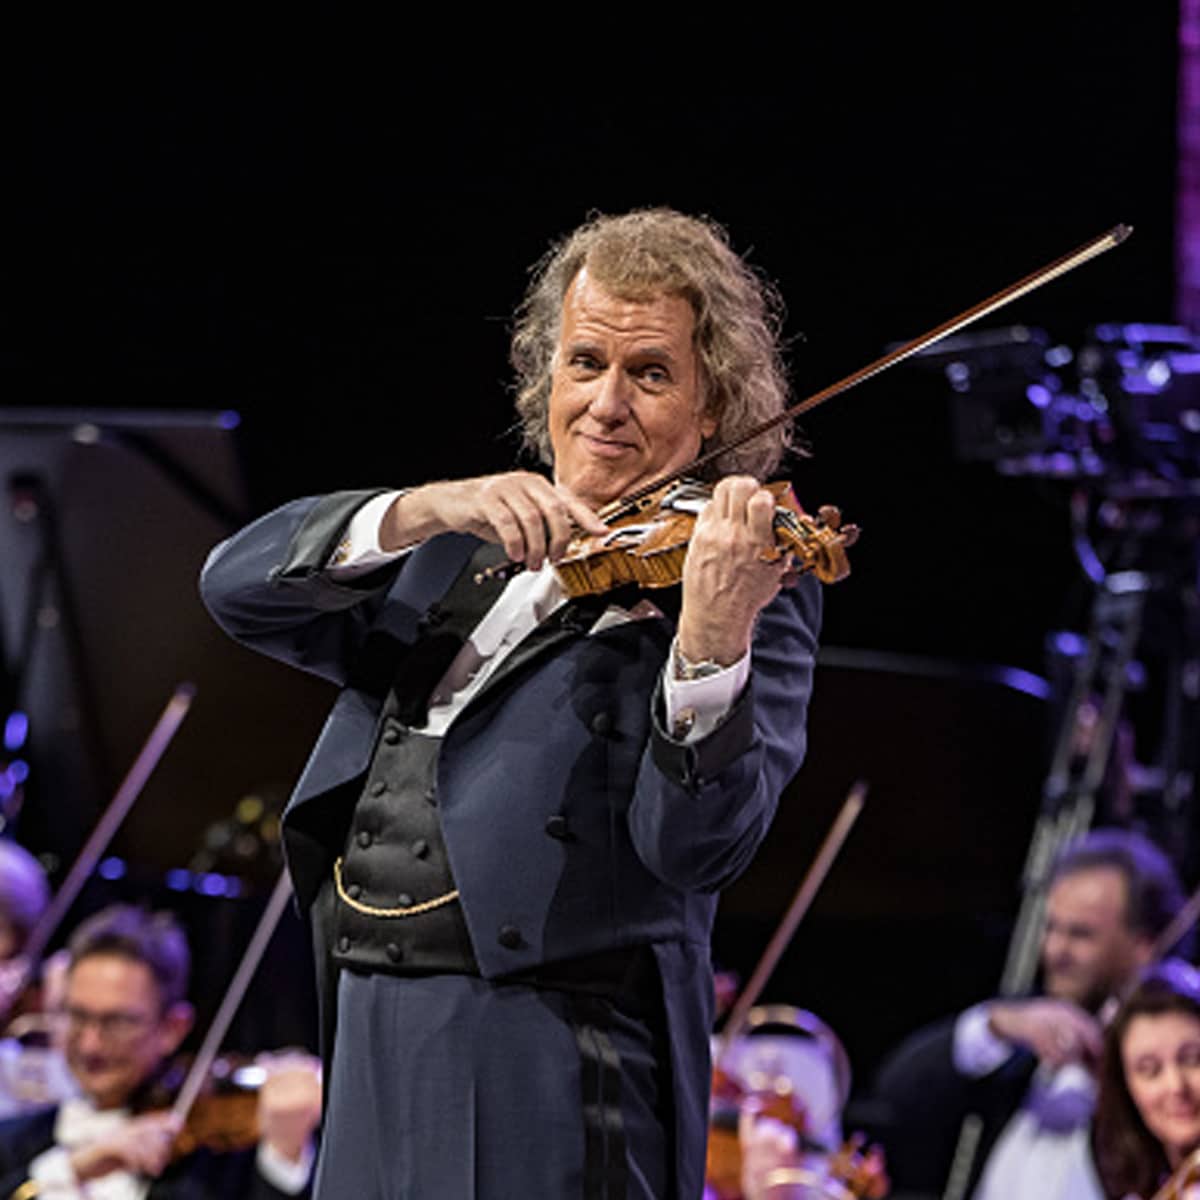 Andre Rieu performs with his orchestra at Ziggo Dome